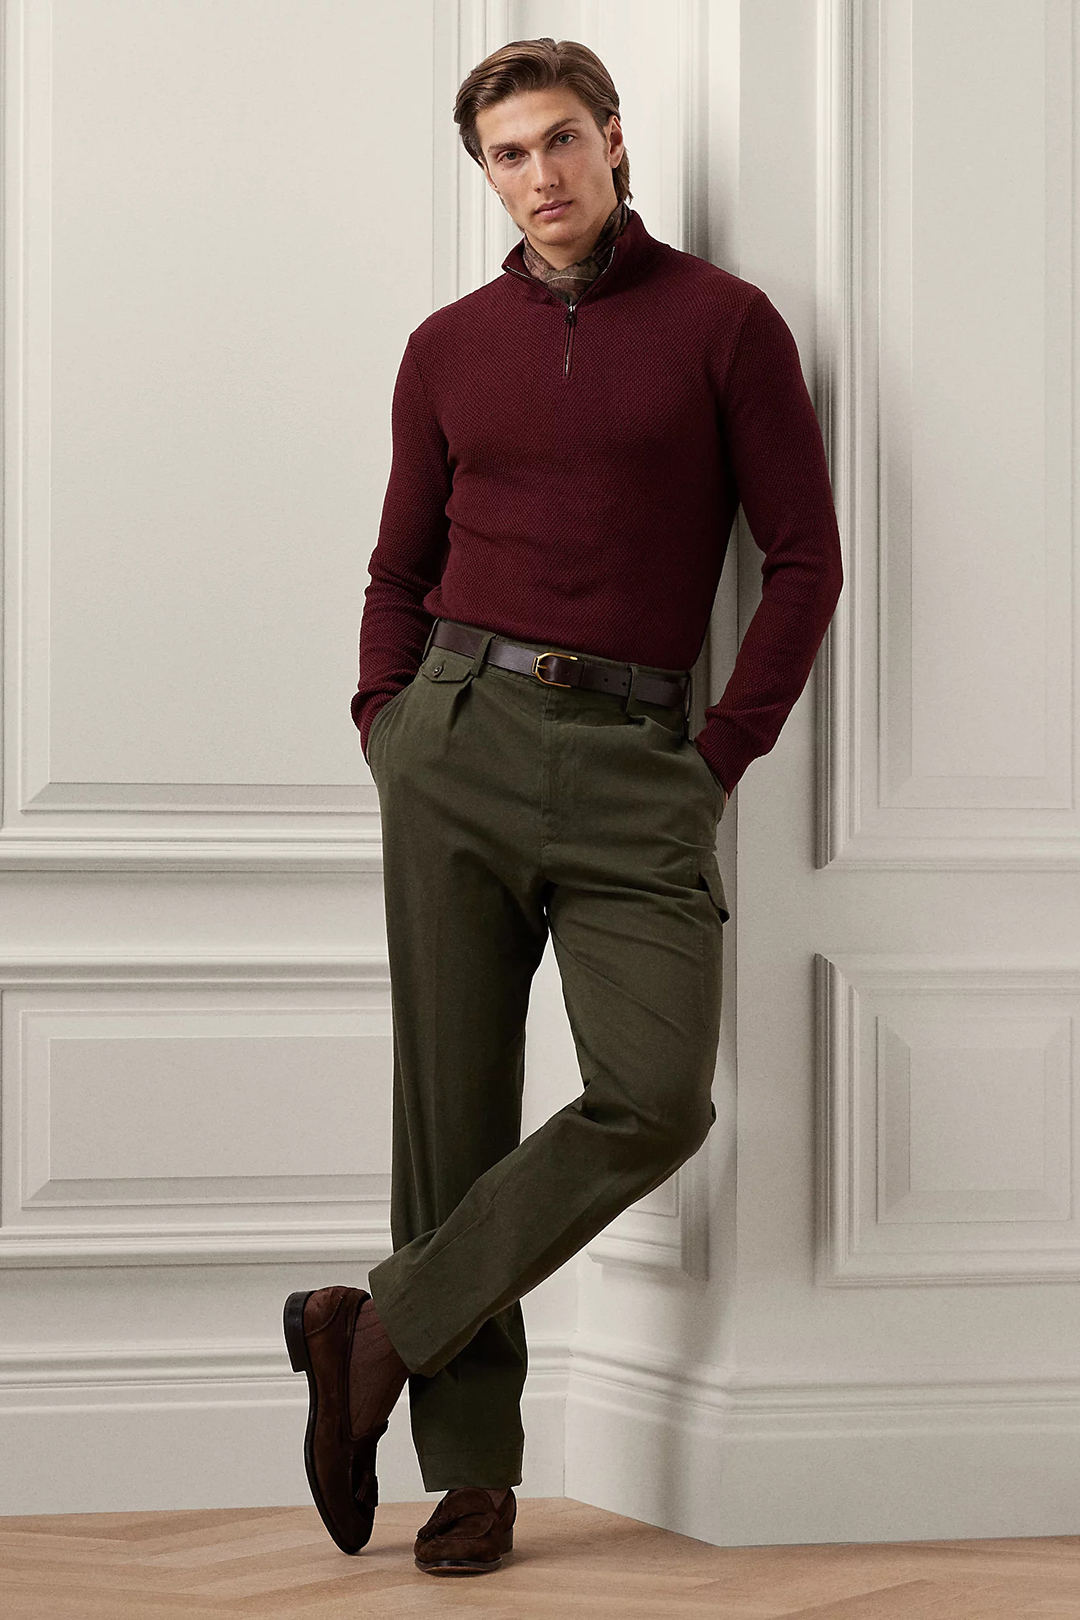 Burgundy zip neck sweater, brown scarf, green chinos, and brown loafers outfit